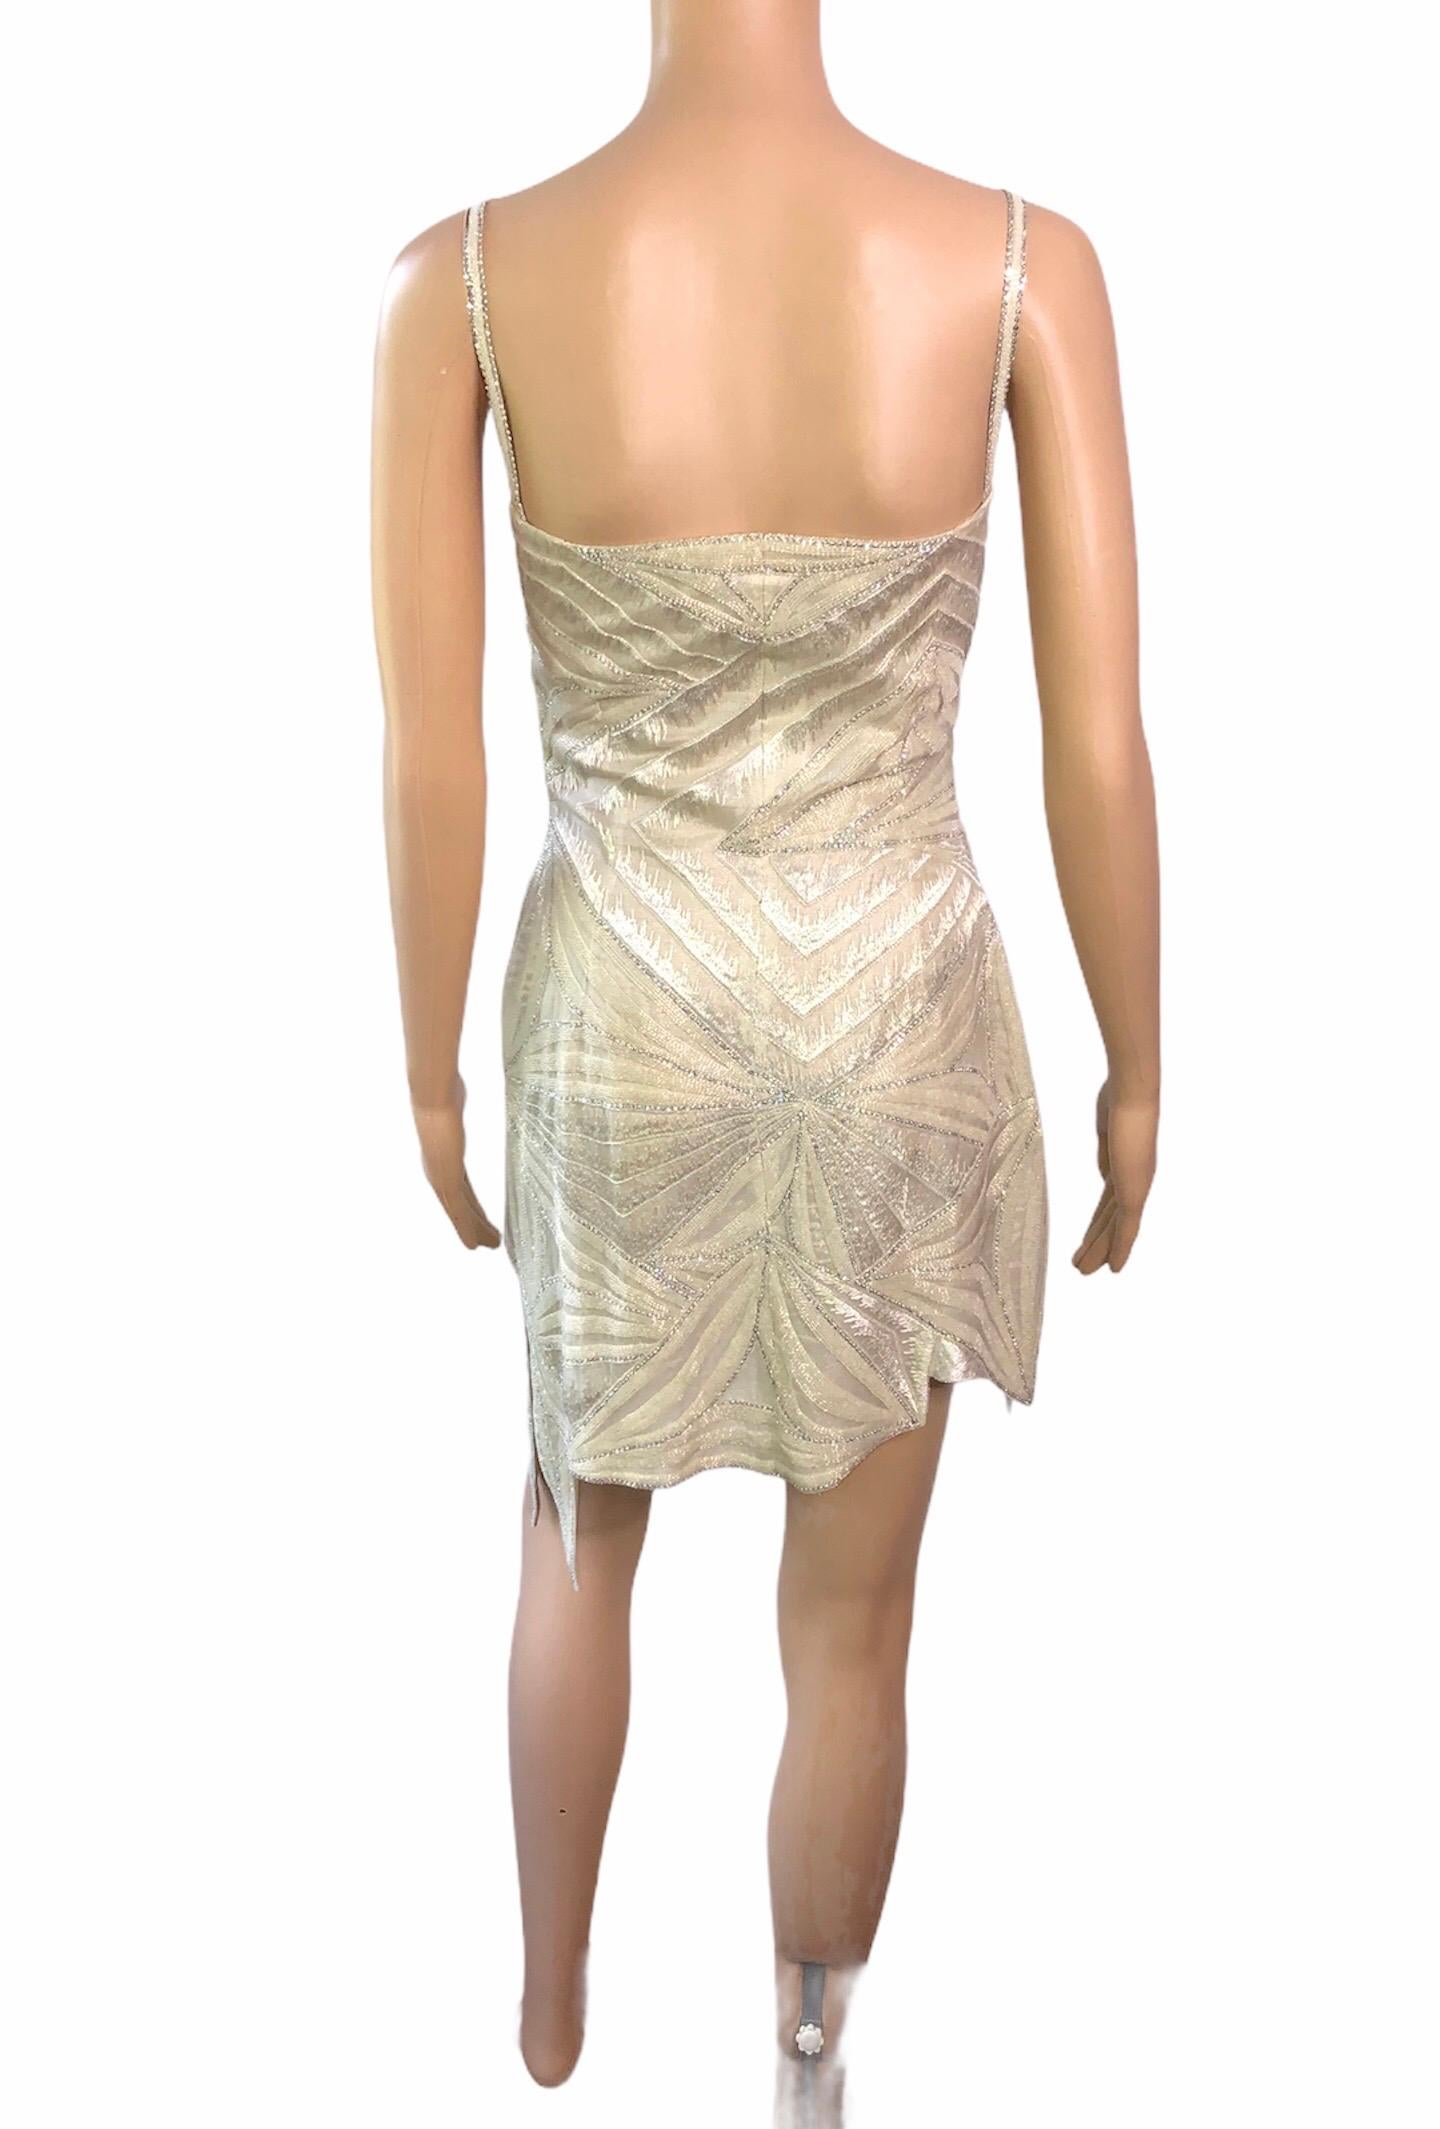 Atelier Versace Haute Couture F/W 1998 Embellished Sheer Cutout Mini Dress For Sale 5